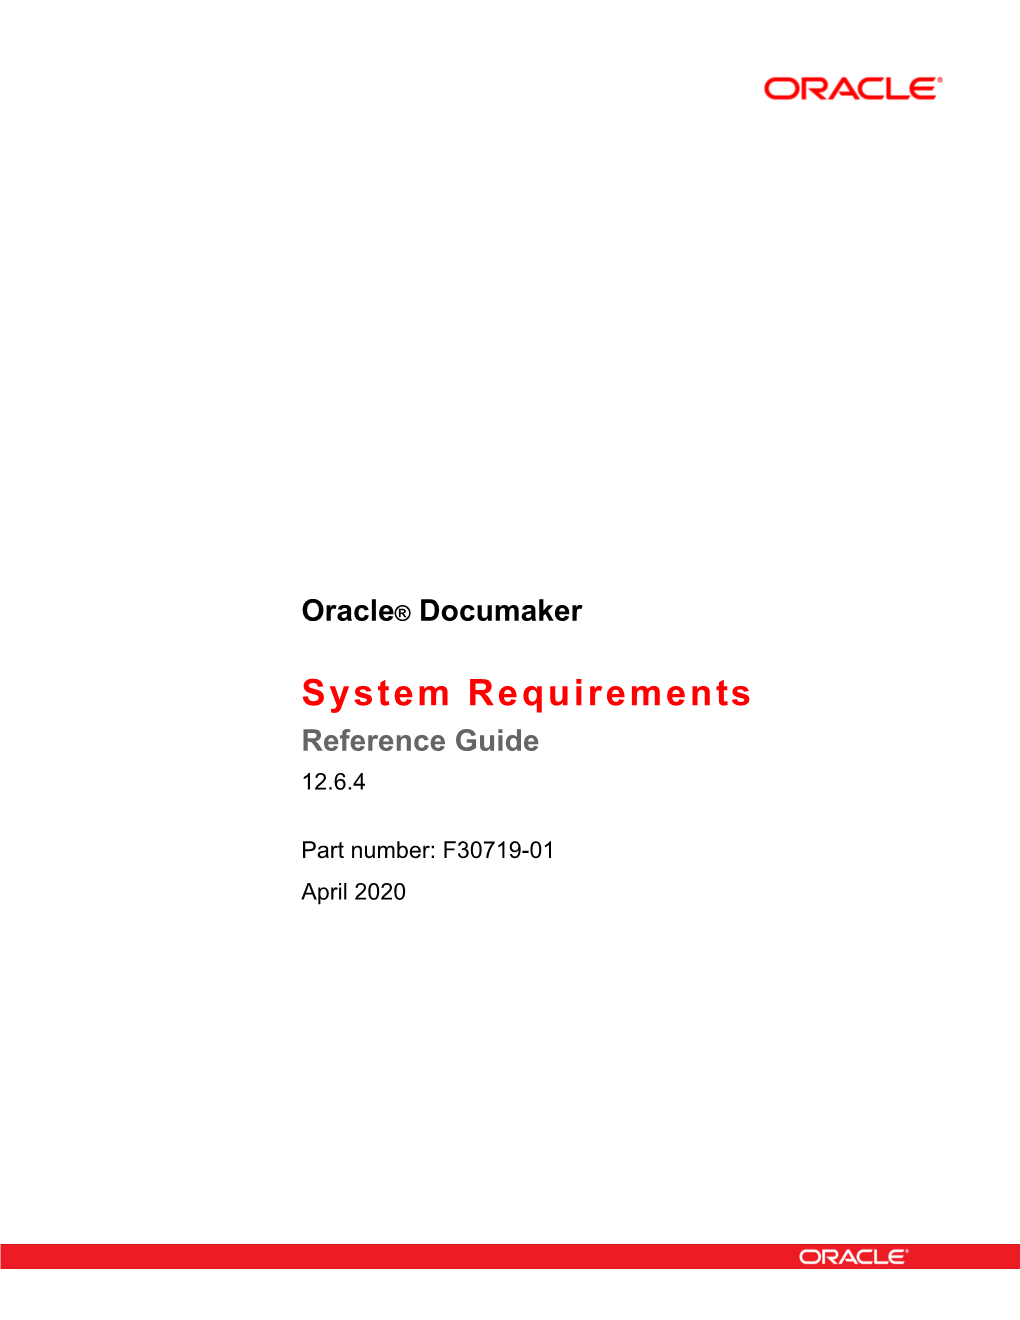 Oracle Documaker System